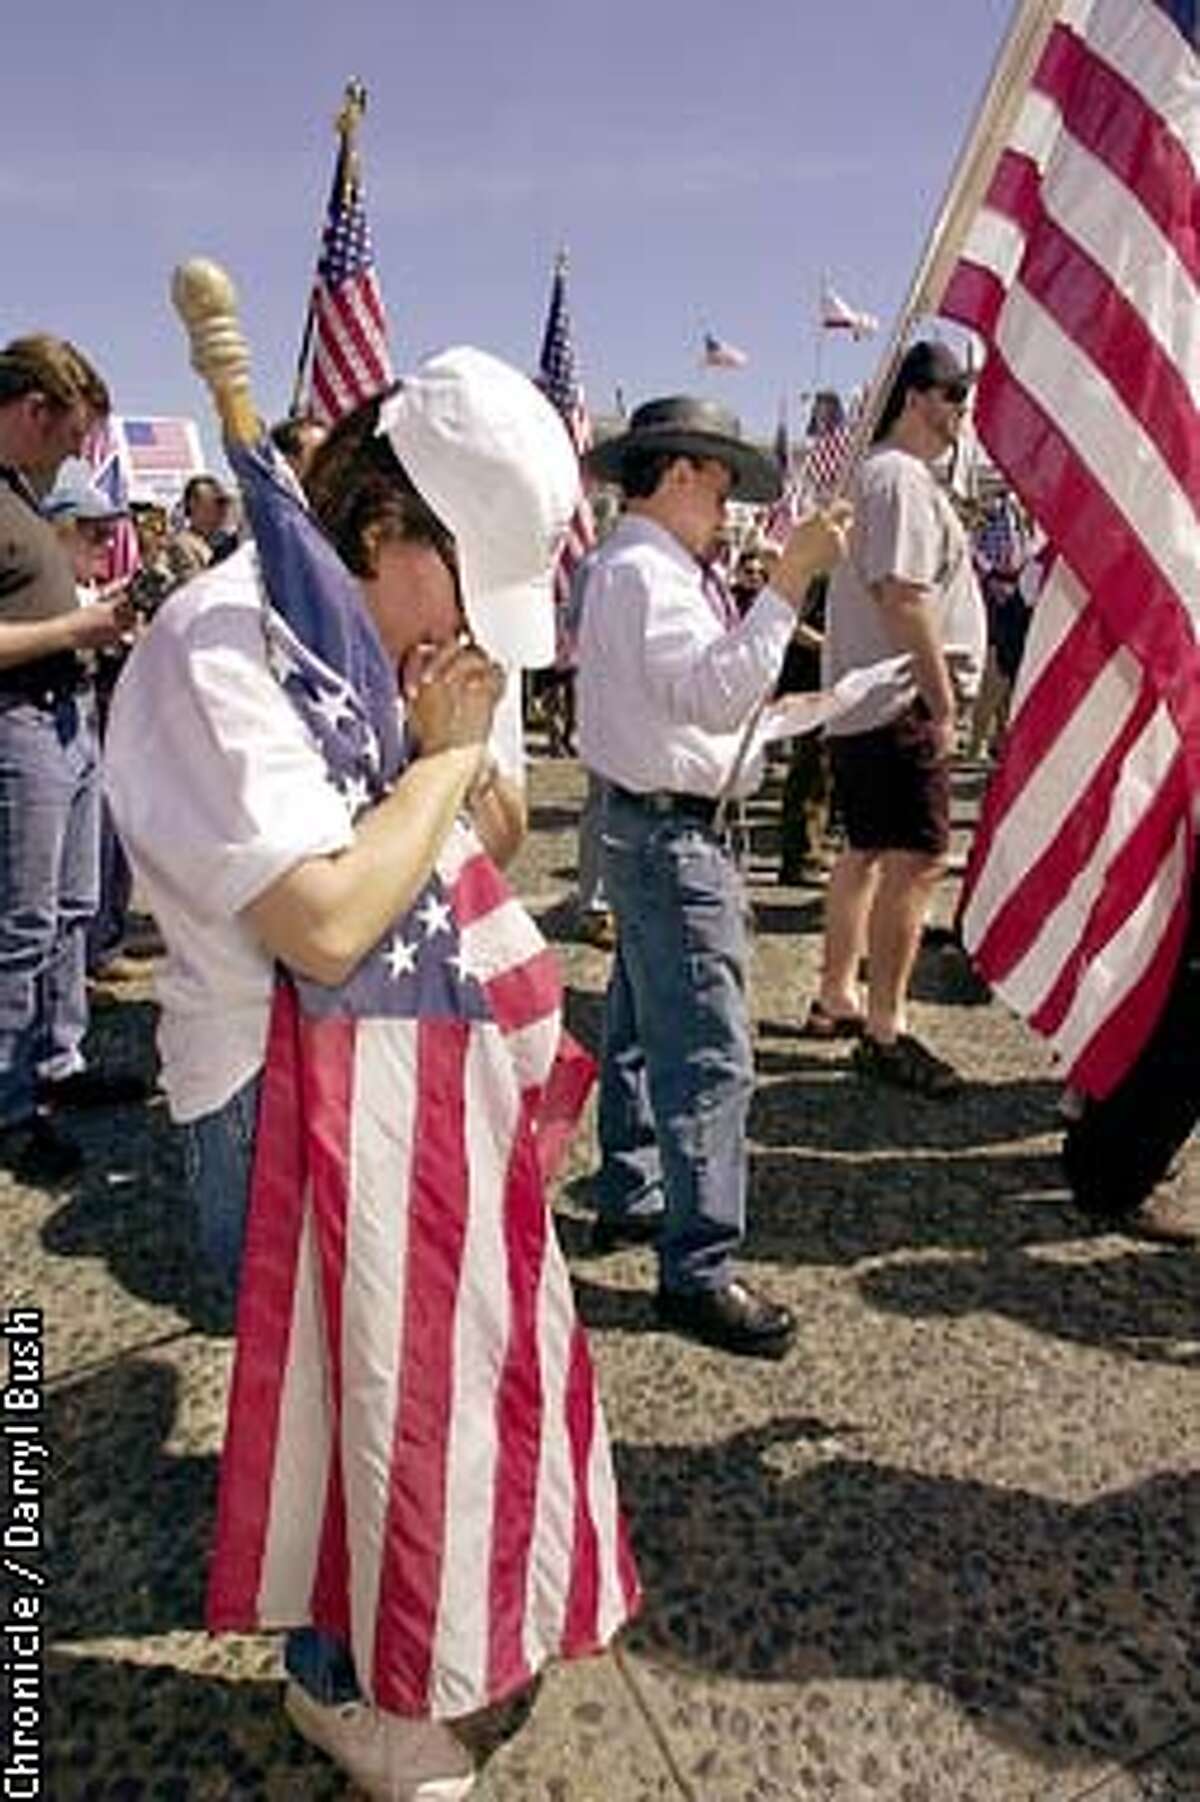 Barbara Mecham of San Carlos, prays while holding an American flag along with others attending a pro-troops rally held at Civic Center in San Francisco. Chronicle Photo by Darryl Bush